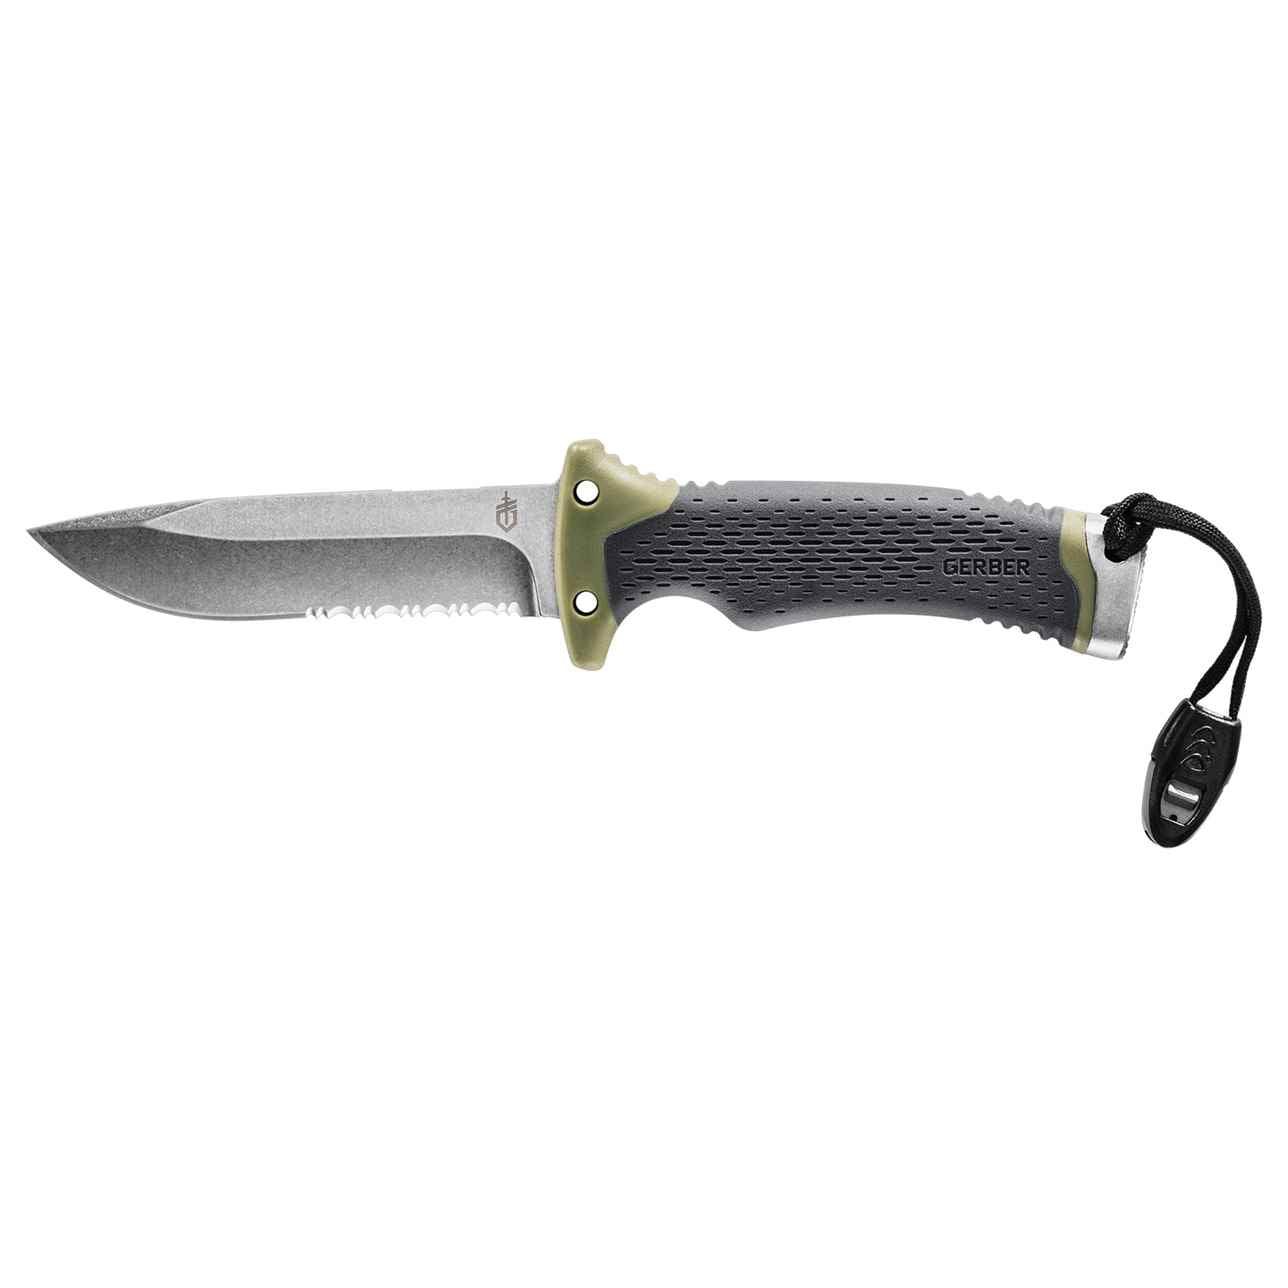 Gerber Ultimate Fixed Blade Green Rubber Serrated 7Cr Stainless Steel - Knives.mx